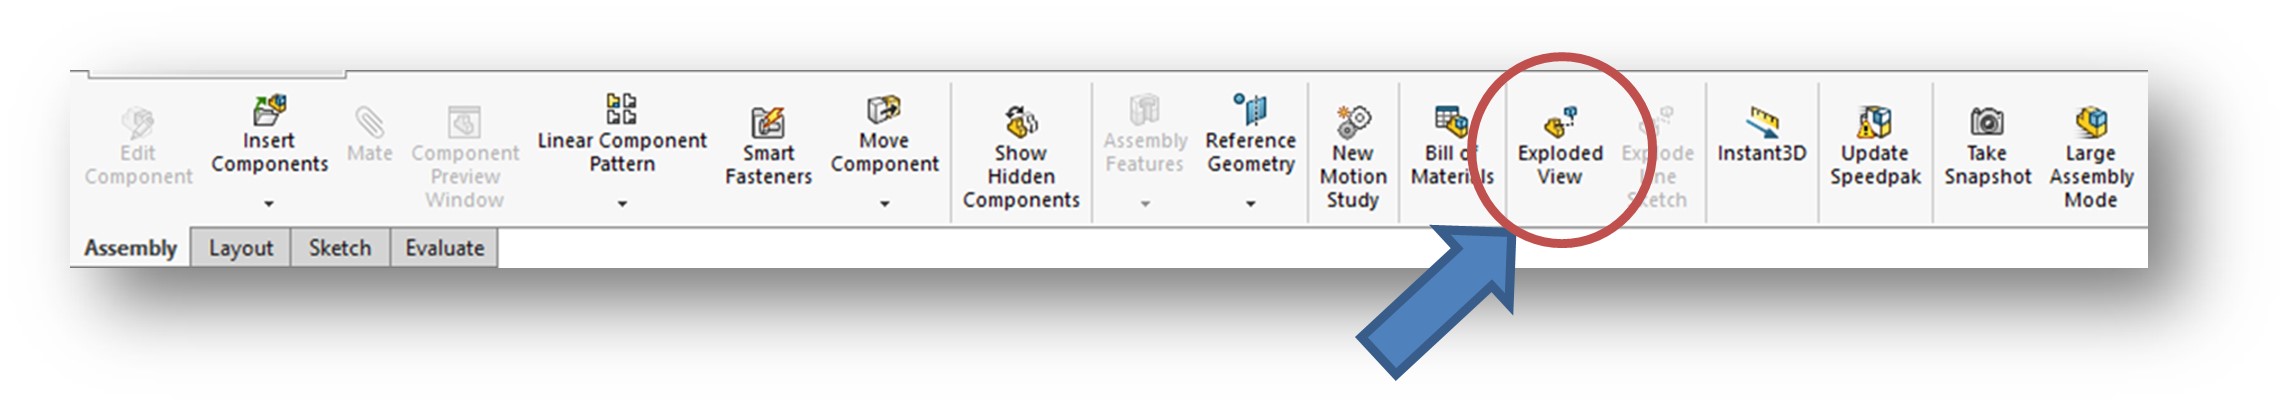 Exploded View Command Icon in the Assembly CommandManager